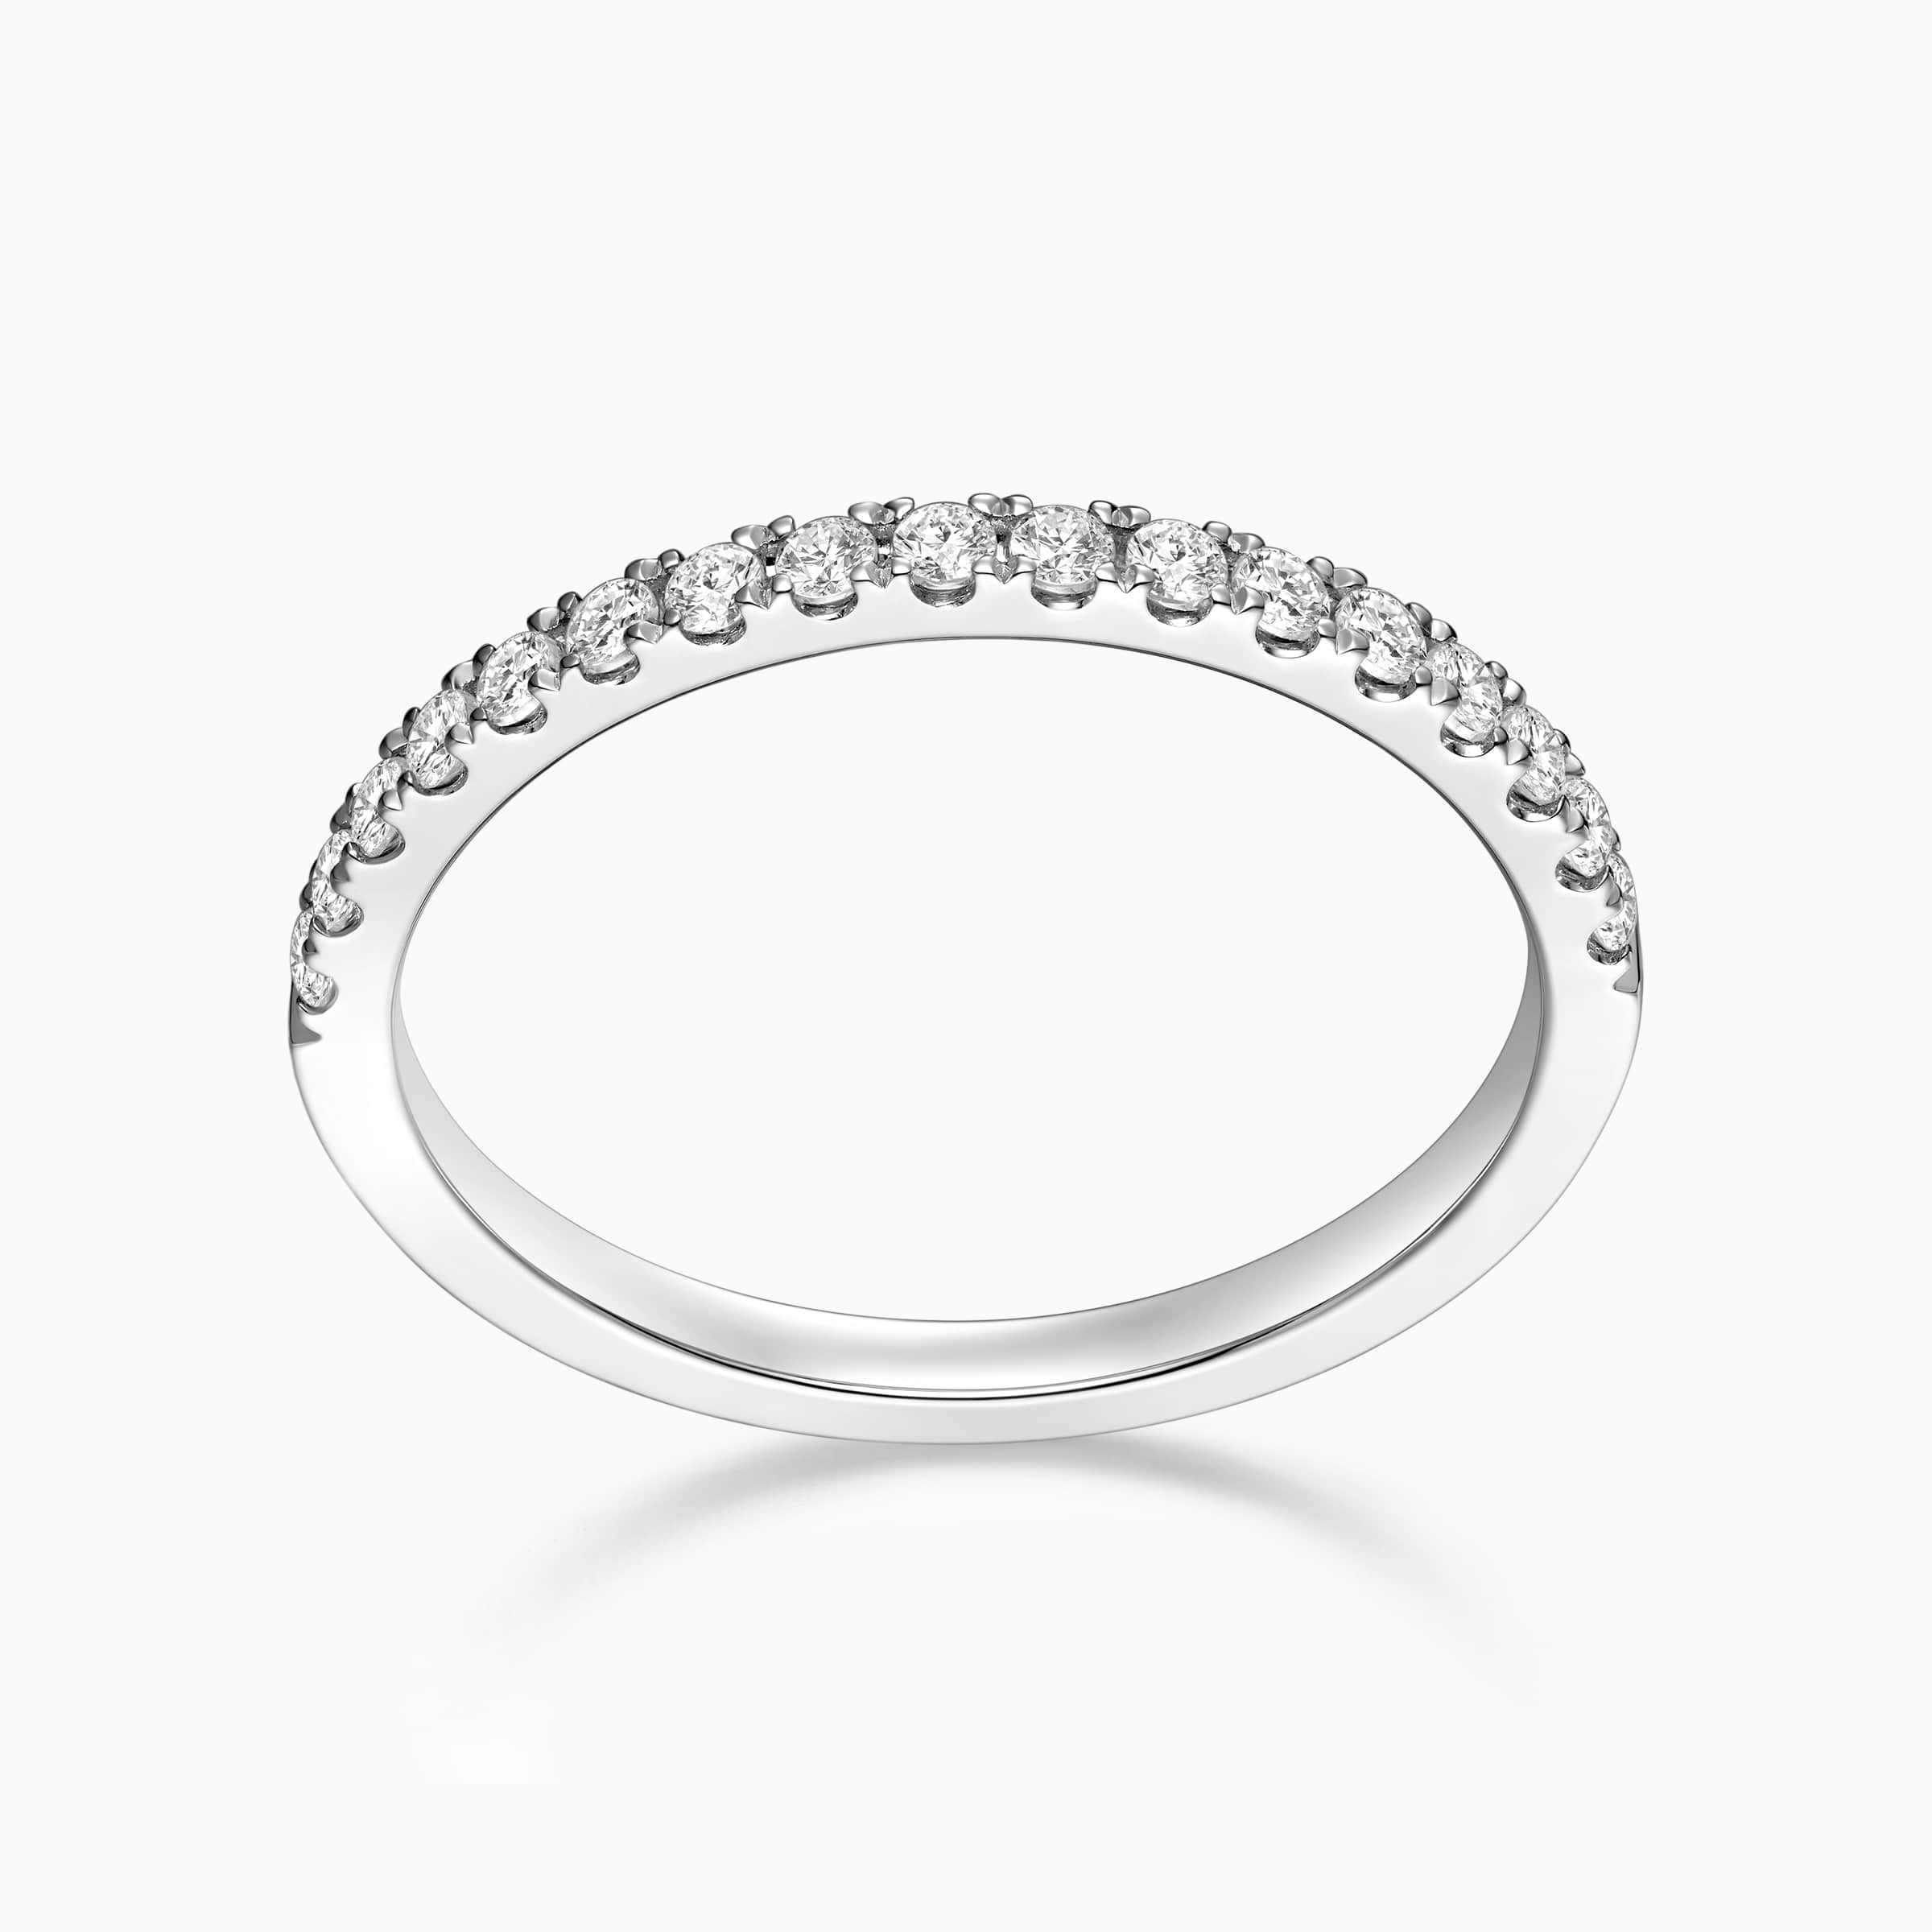 Darry Ring eternity ring for women top view